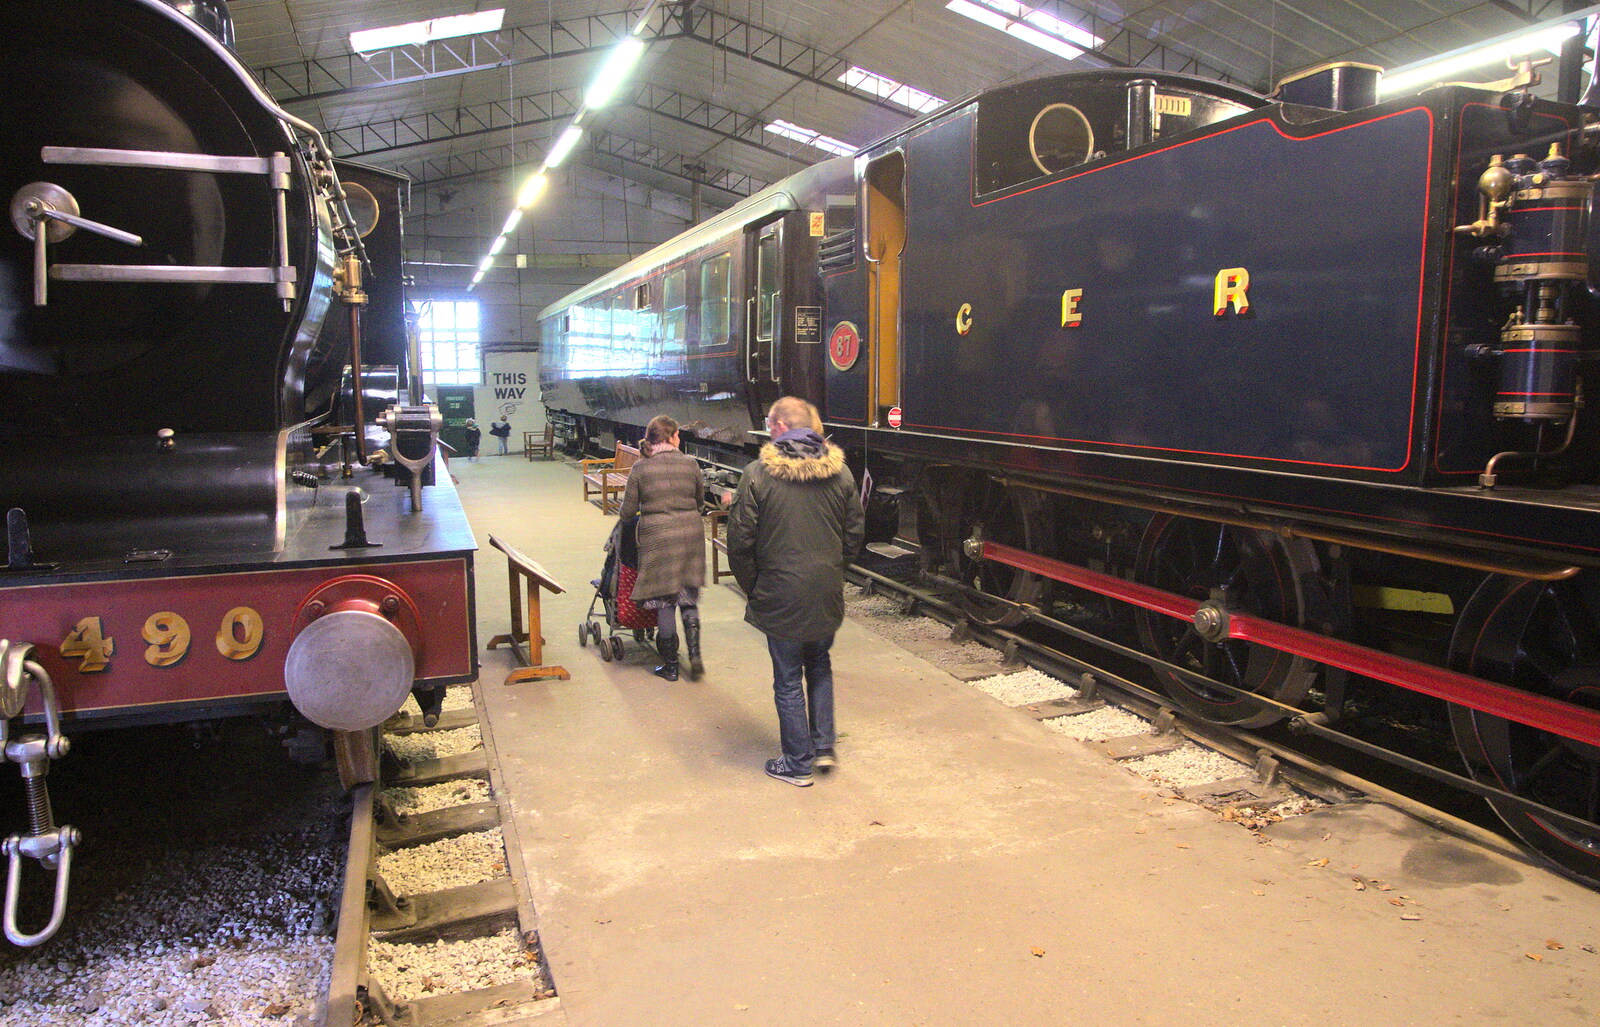 Roaming around the engine sheds from A Day at Bressingham Steam and Gardens, Diss, Norfolk - 18th May 2013